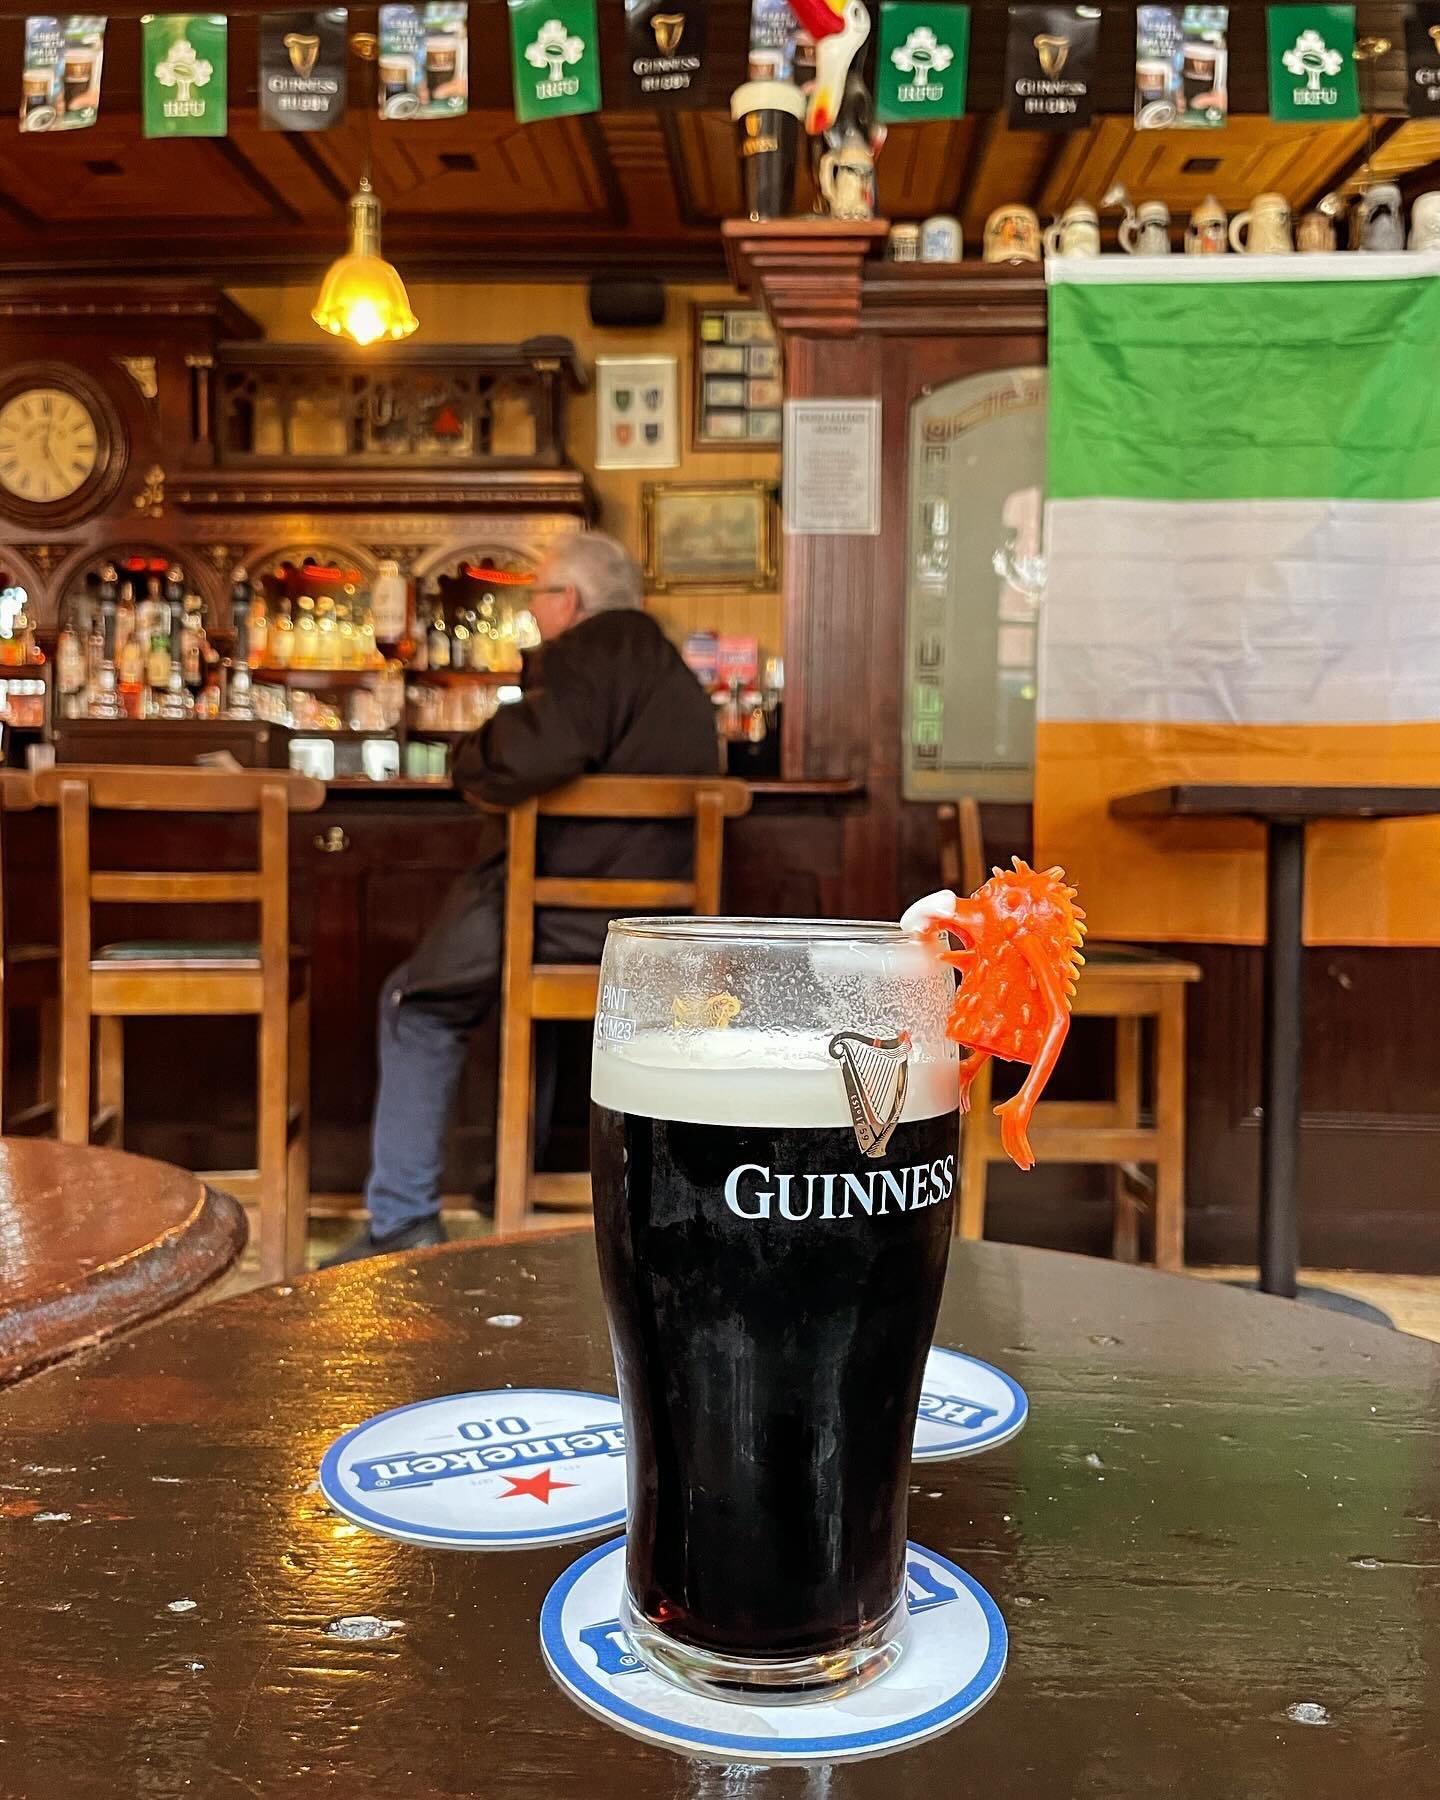 Thanks to @mr_magilacuty for capturing the quintessential Dublin moment: a perfectly poured Guinness awaiting the pleasure of company. Swing by, your seat's reserved and the craic is only beginning! 

#PerfectPint #DublinPubScene #MolloysDublin